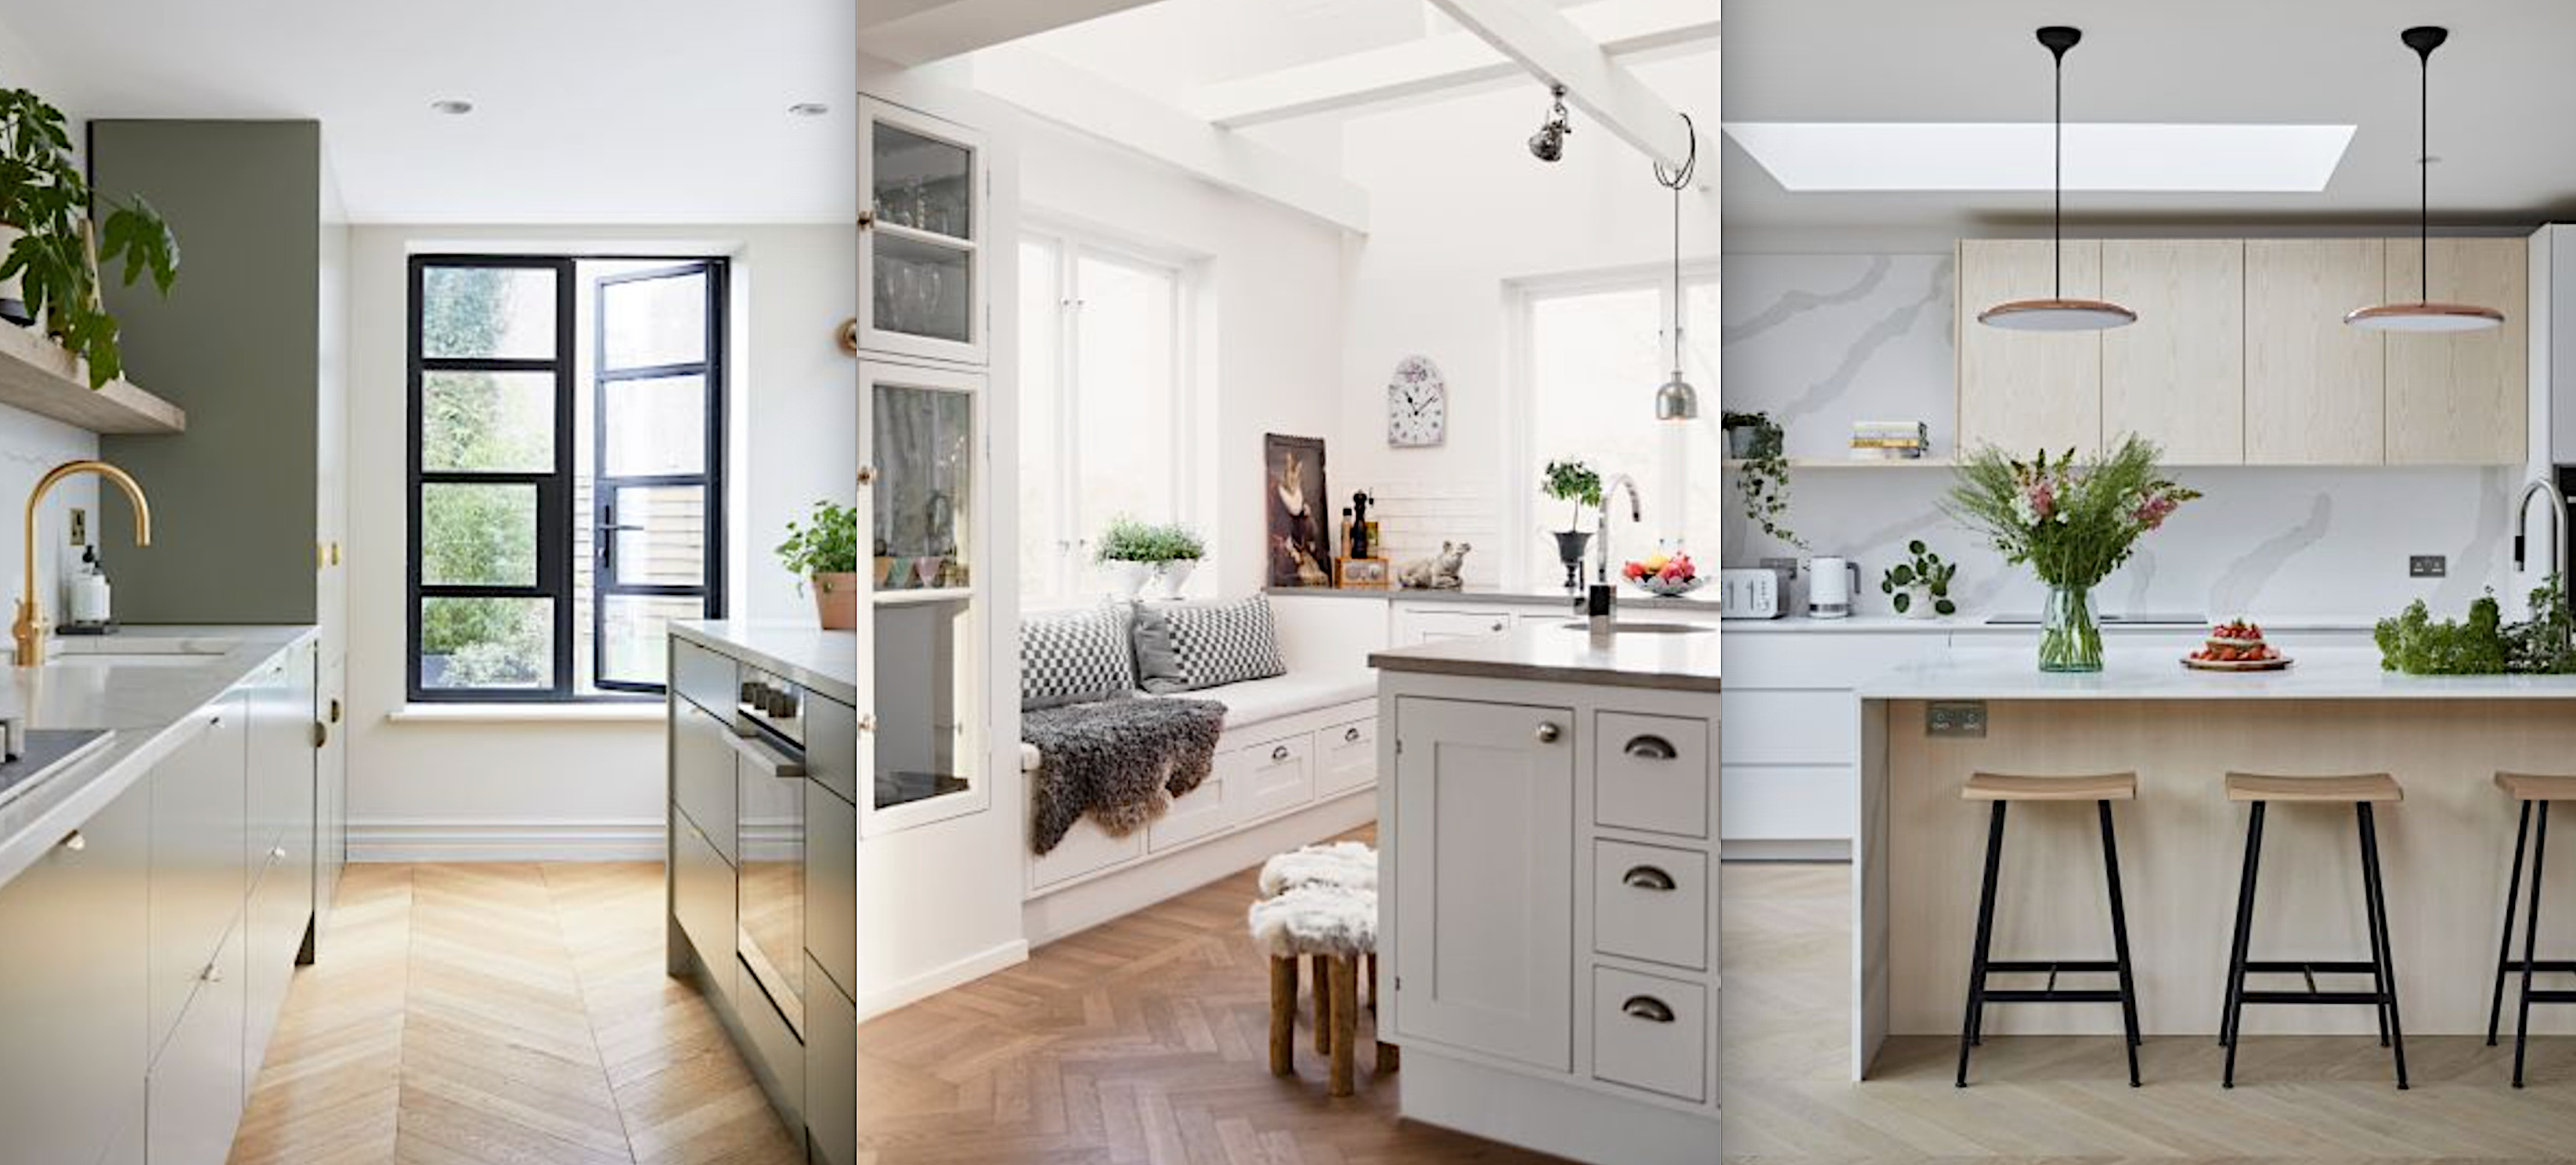 Scandinavian kitchens 20 ideas function and character   Homes ...